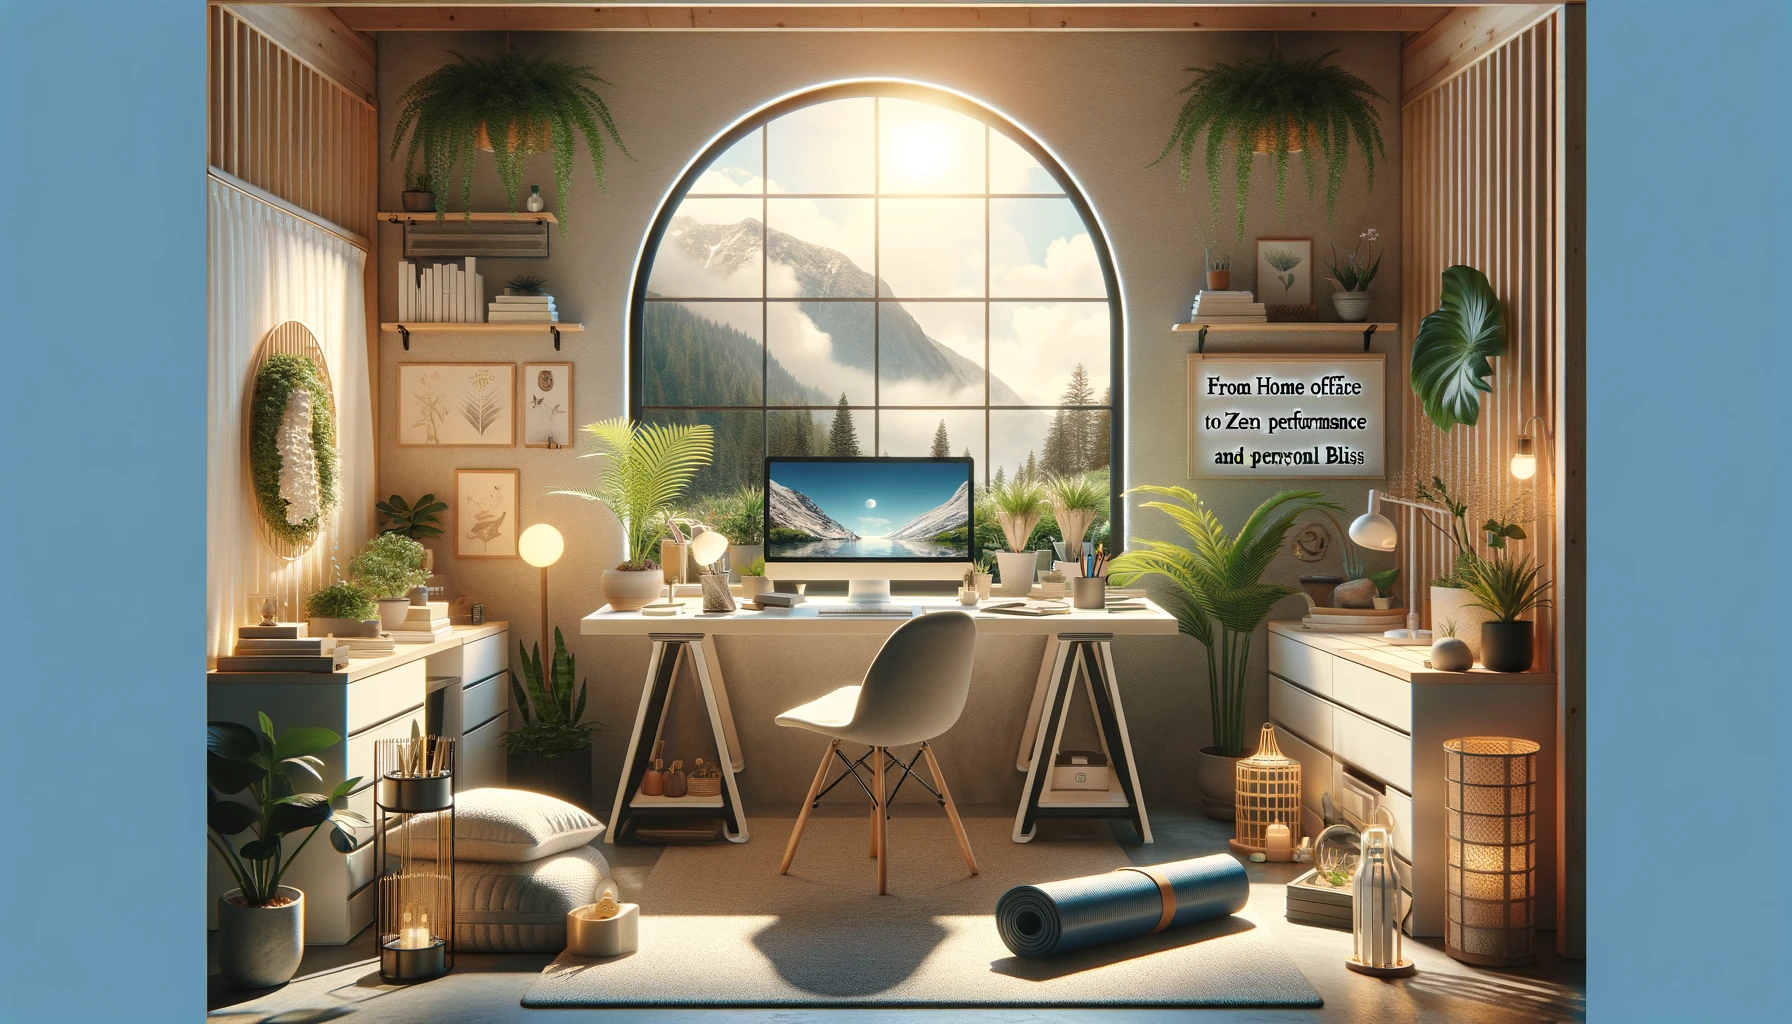 A sun-drenched serene home office with plants and other soothing objects placed around the desk